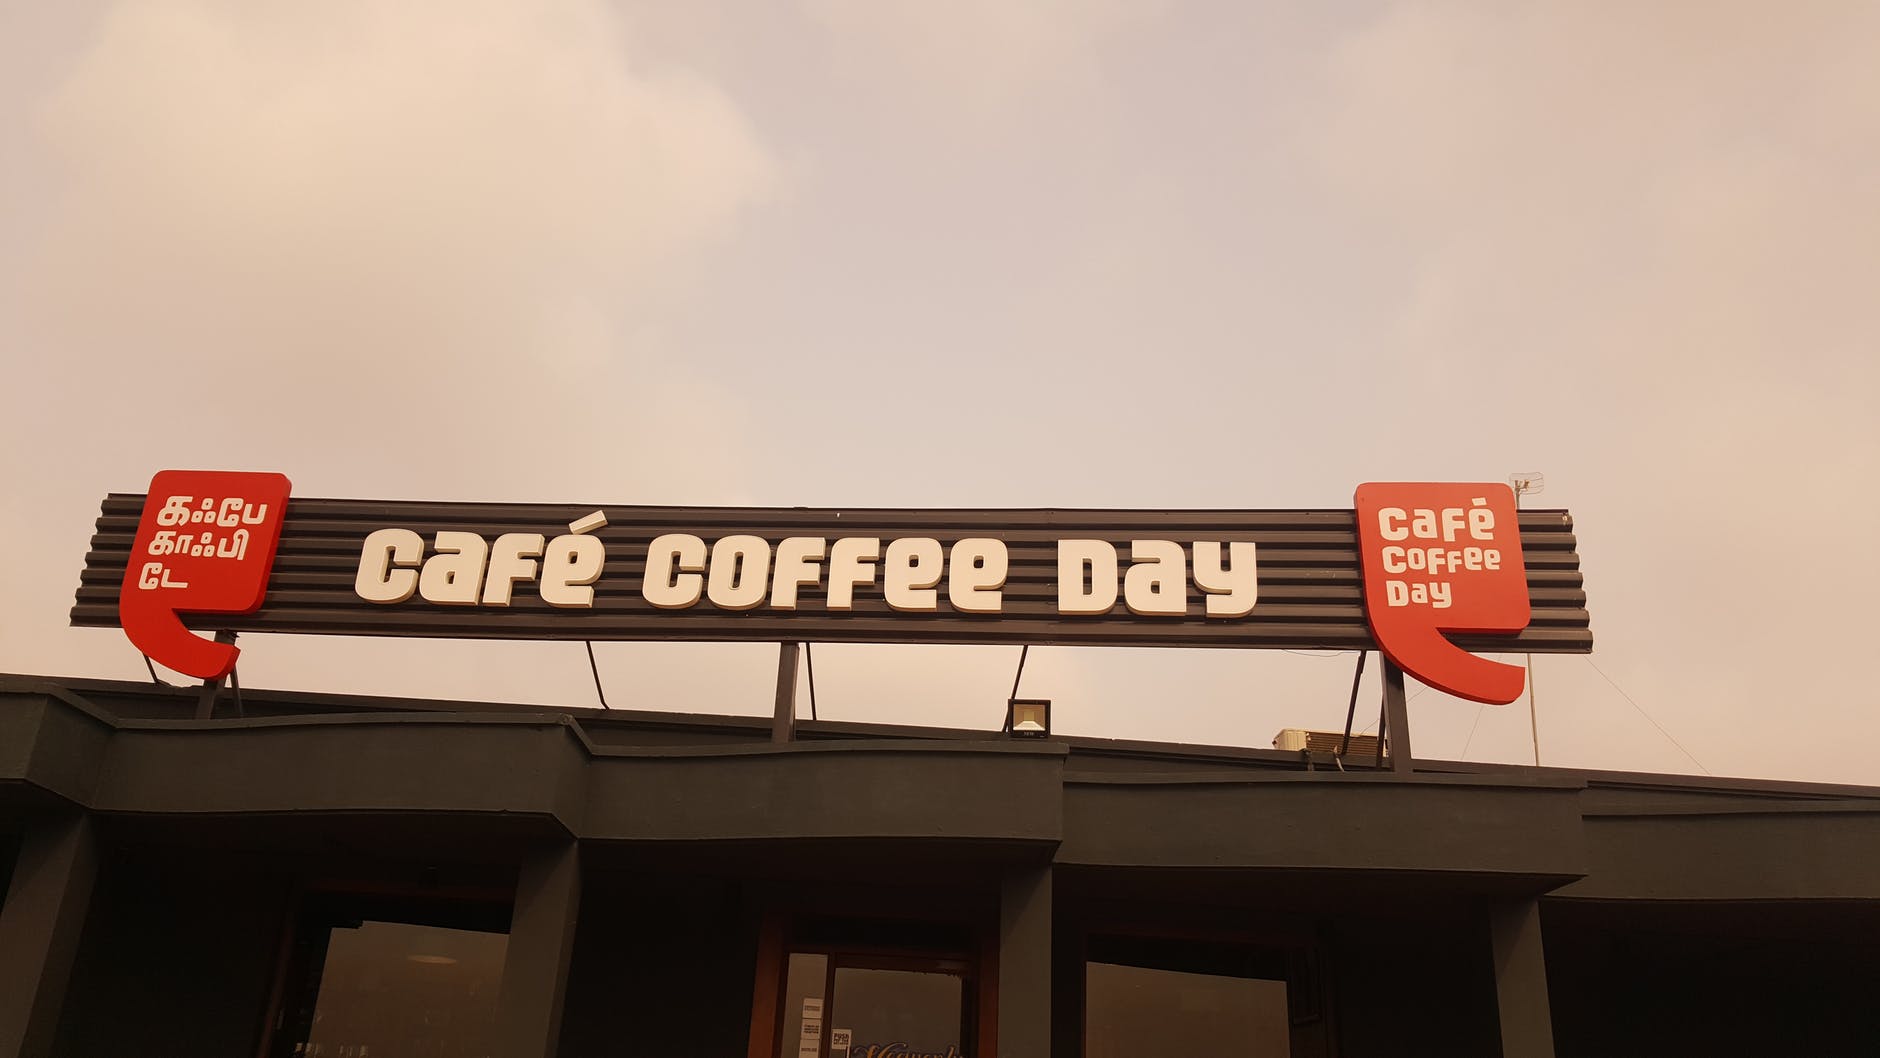 Cafe coffee day – a few thoughts